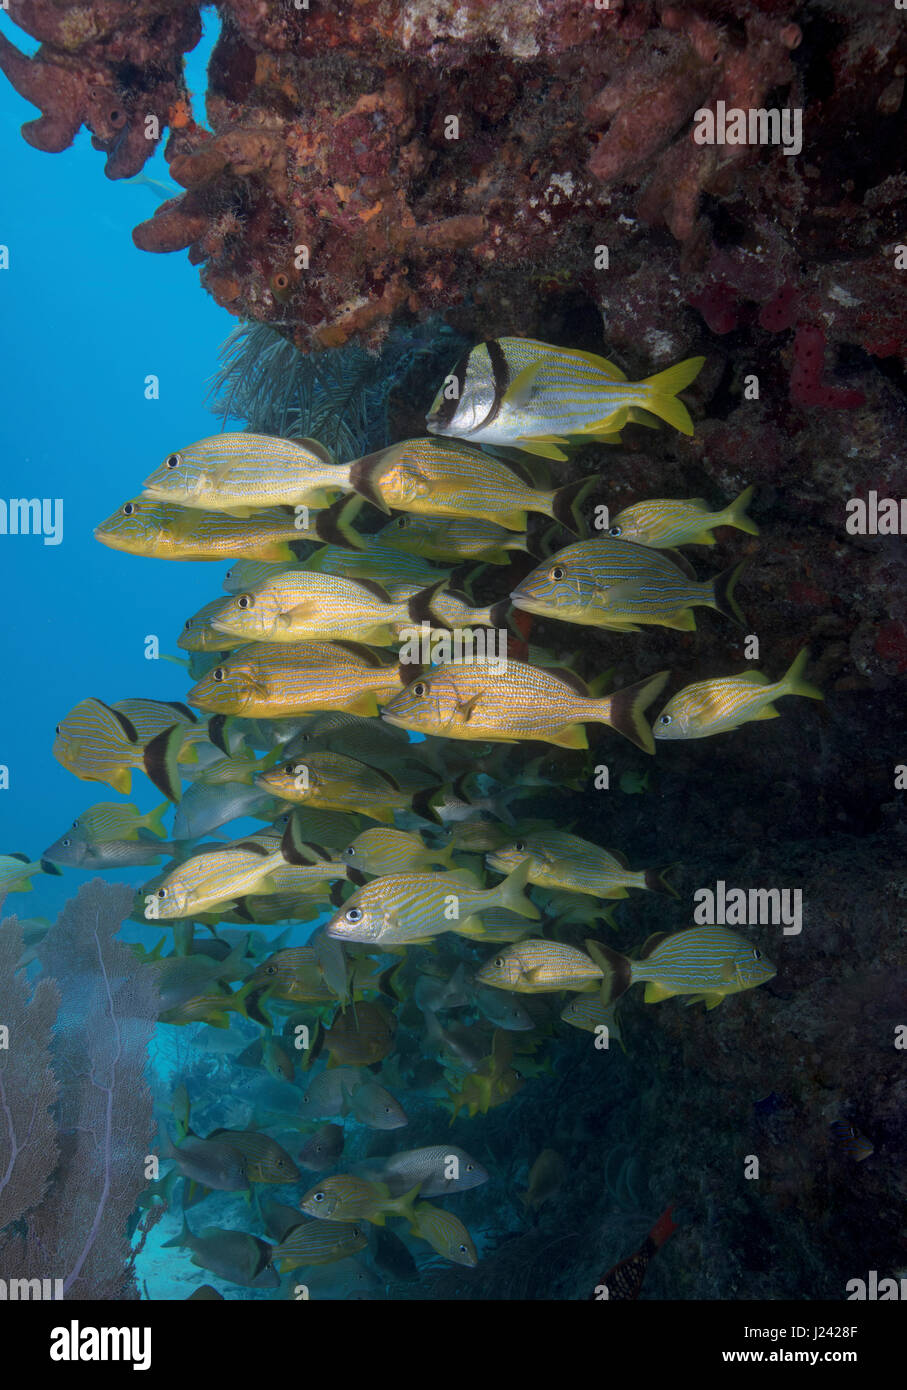 Schooling fish gather near the protection of a ledge on a coral reef in Key Largo. Stock Photo